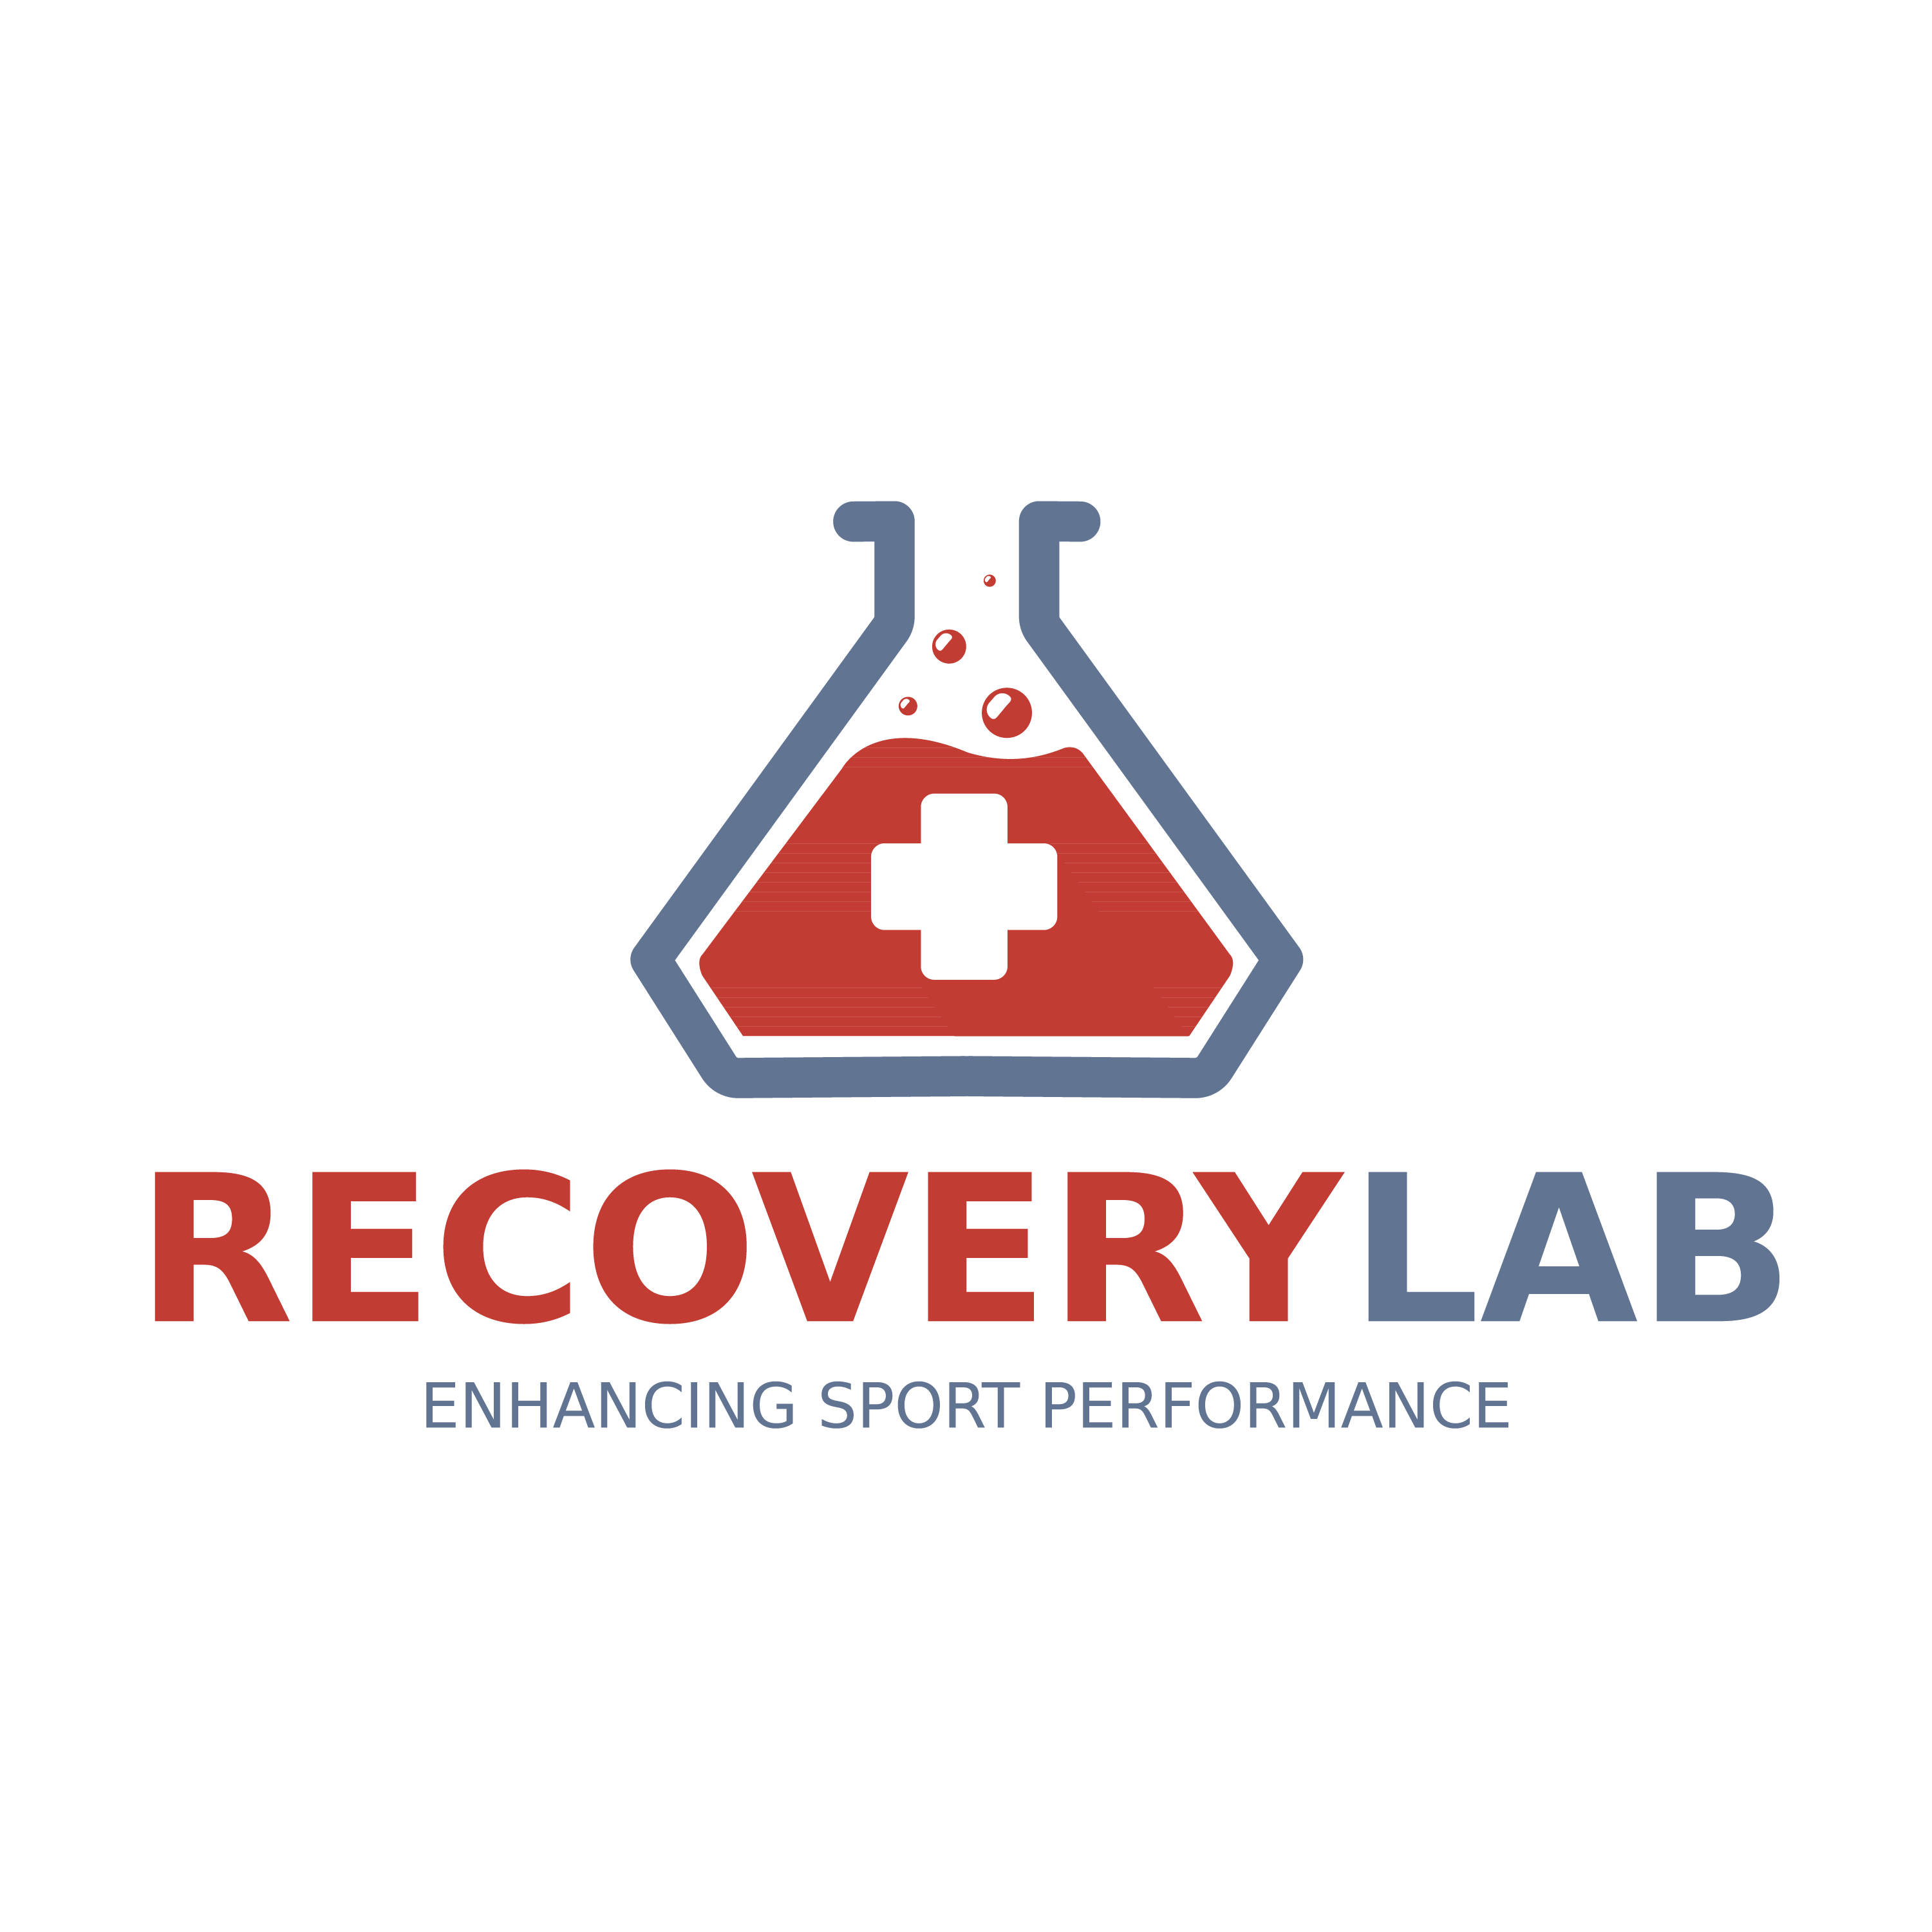 Club Image for RECOVERY LAB